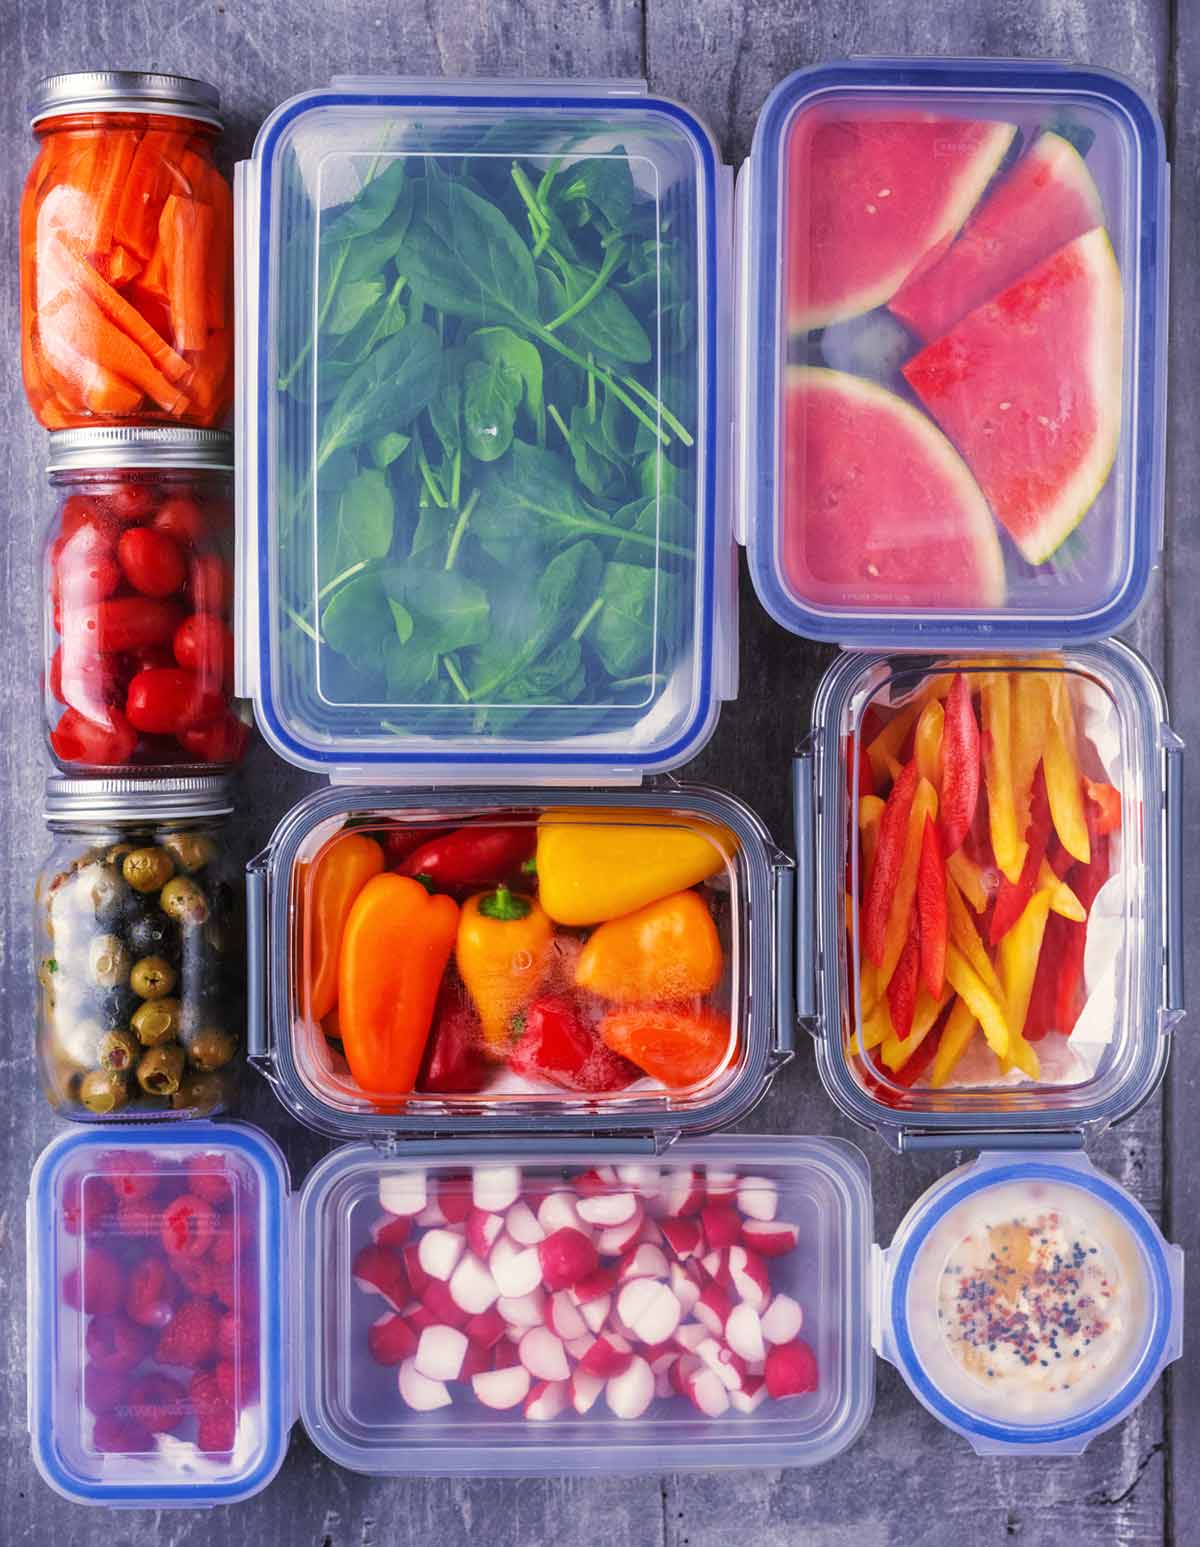 Glass containers with carrots, tomatoes, olives, berries, spinach, melon, peppers, radish and hummus.